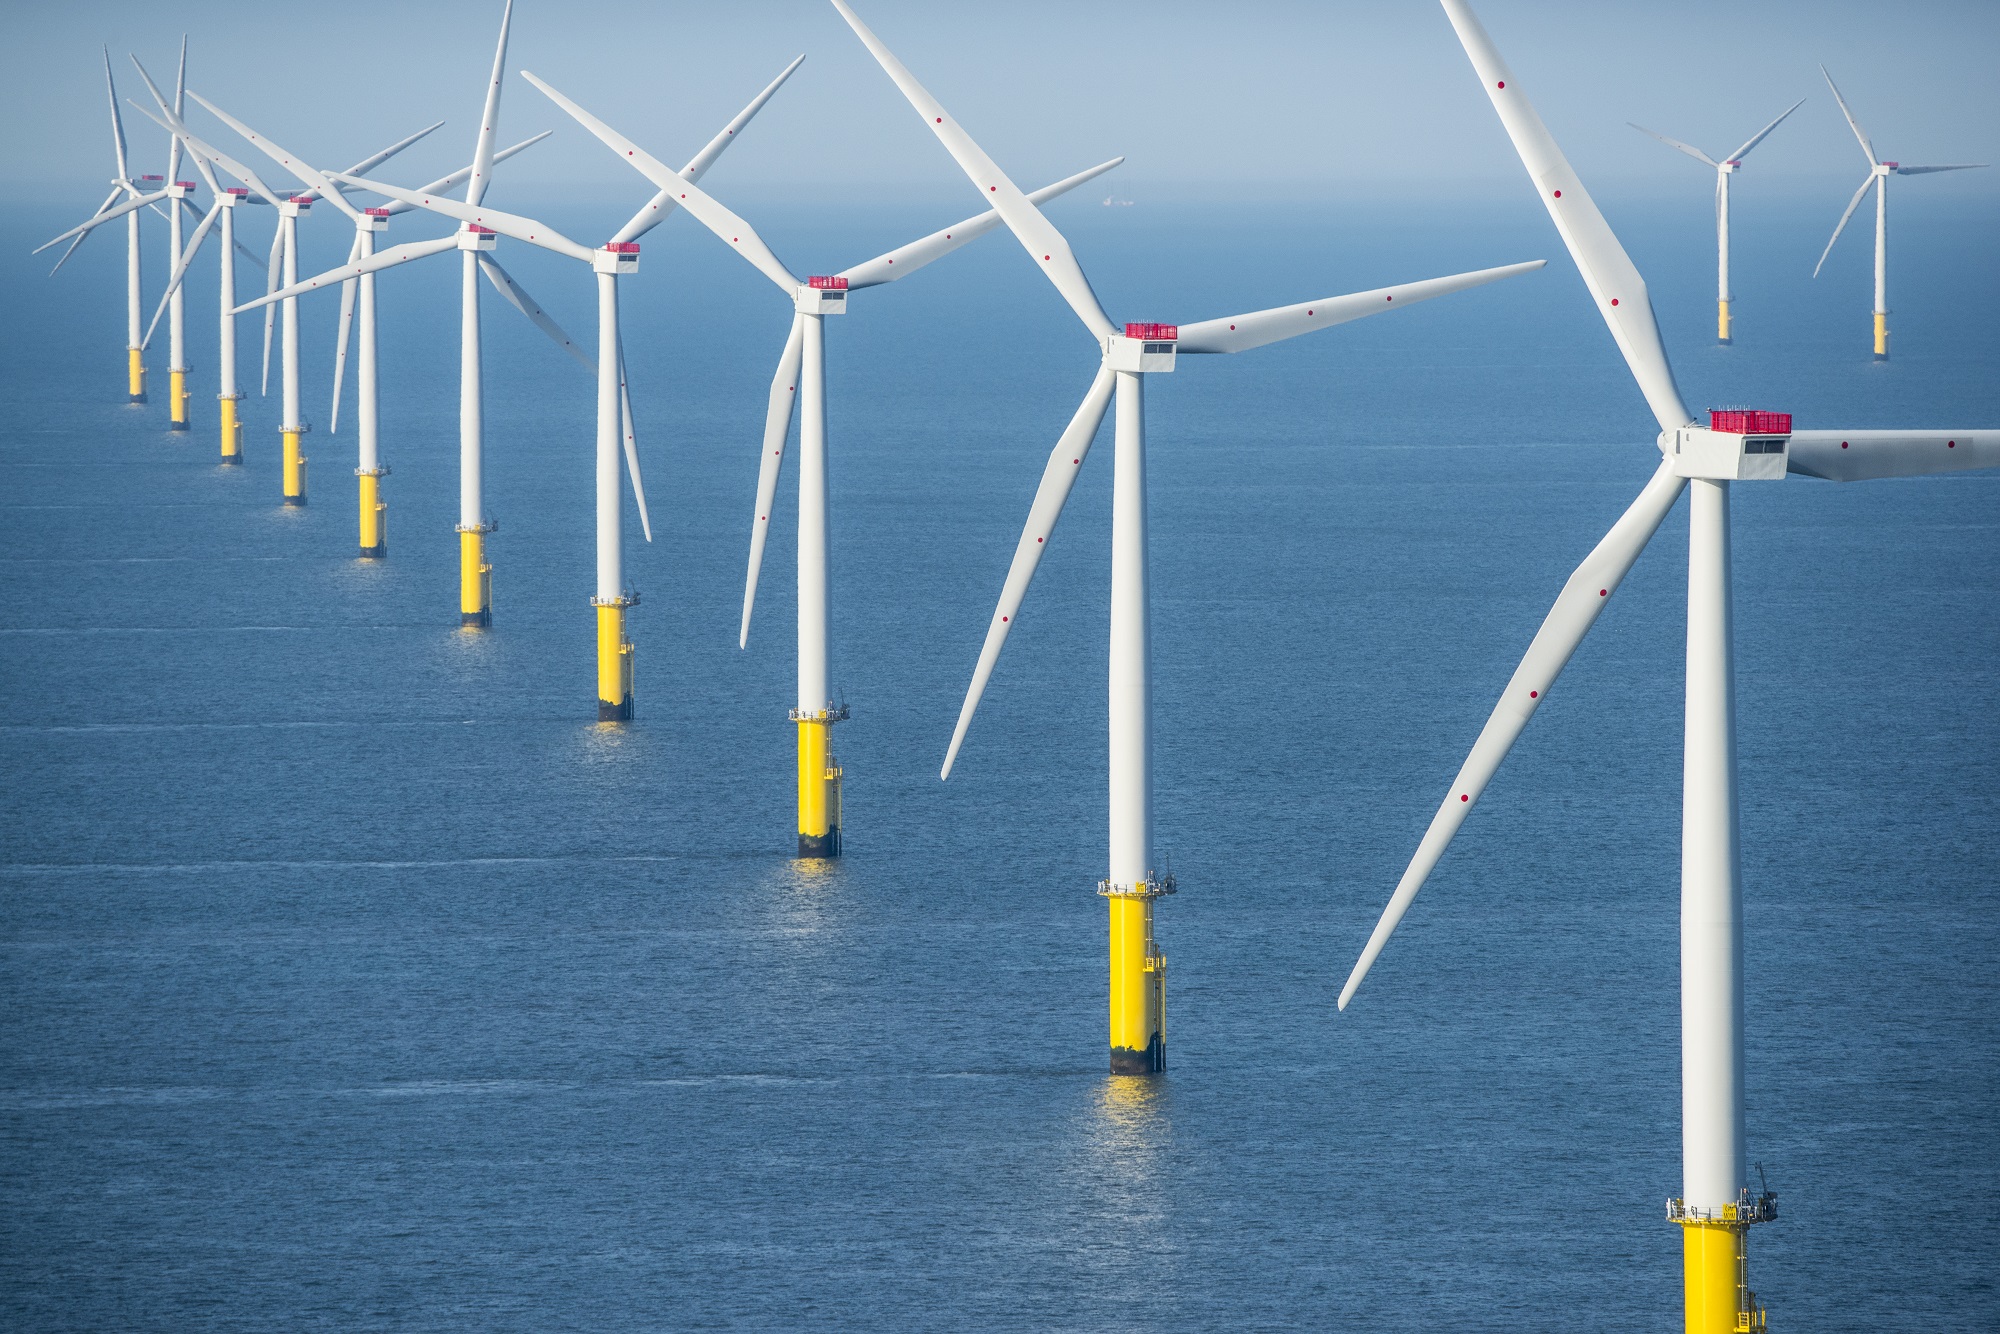 A line of wind turbines stretch out across the sea.